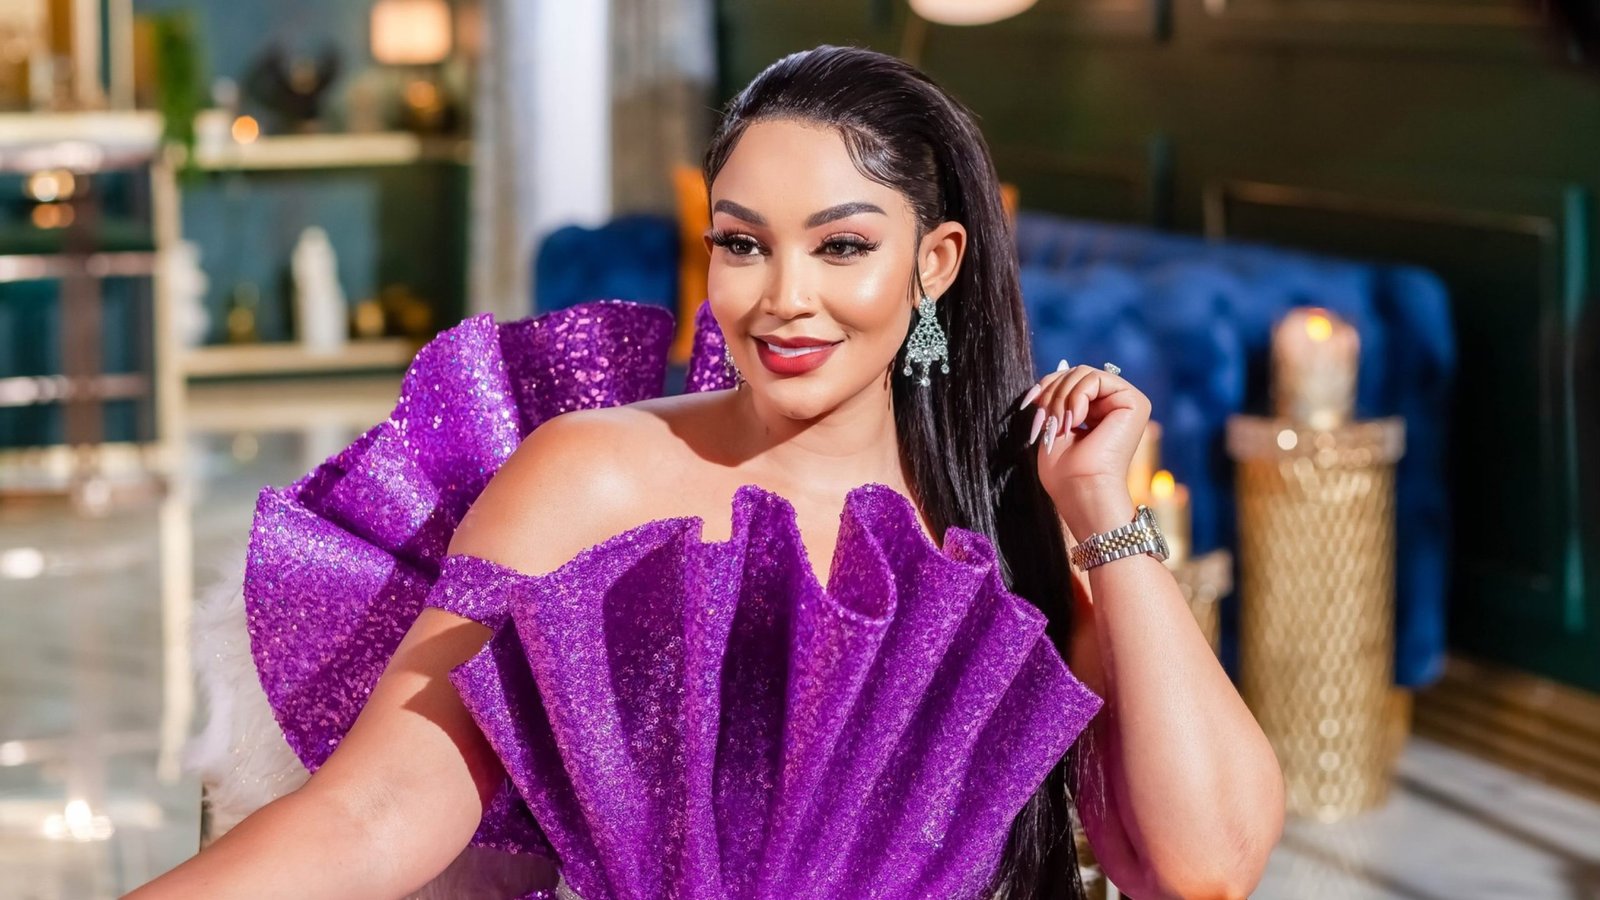 zari-hassan’s-$10,000-plastic-surgery-journey:-a-boost-to-her-confidence-and-self-care